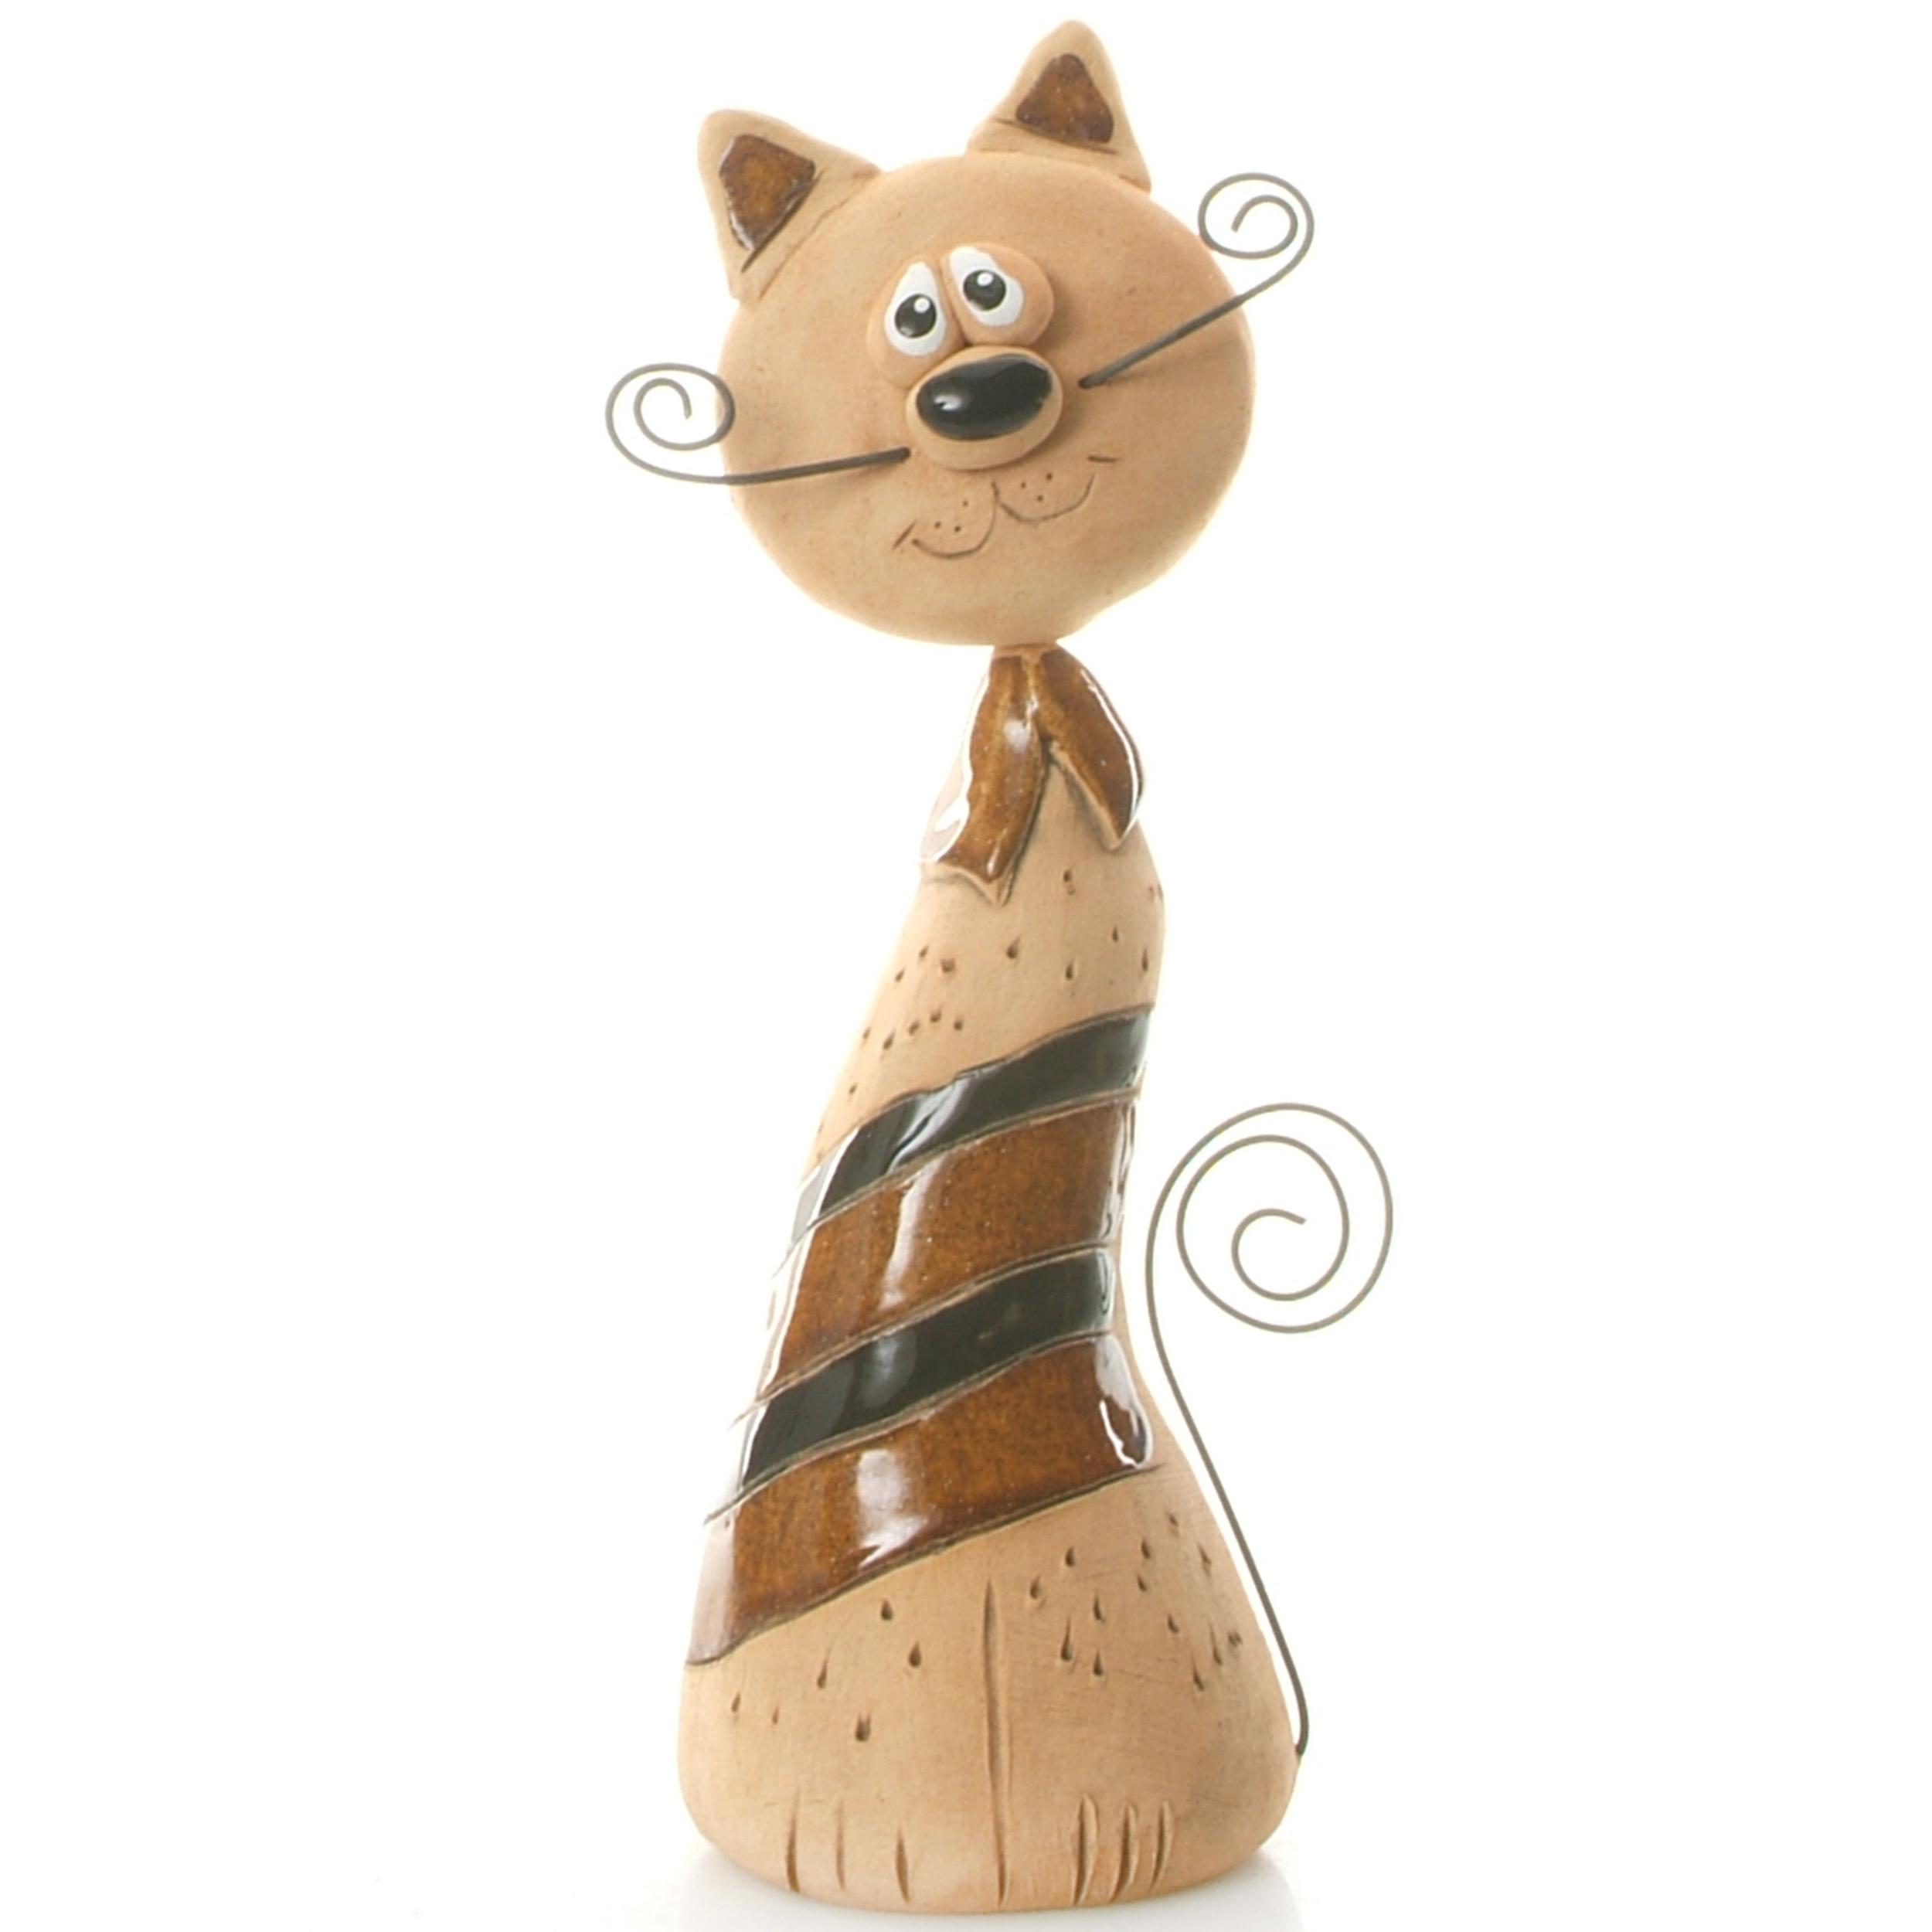 Ceramic Crazy Cat with Wire Whiskers and Tail